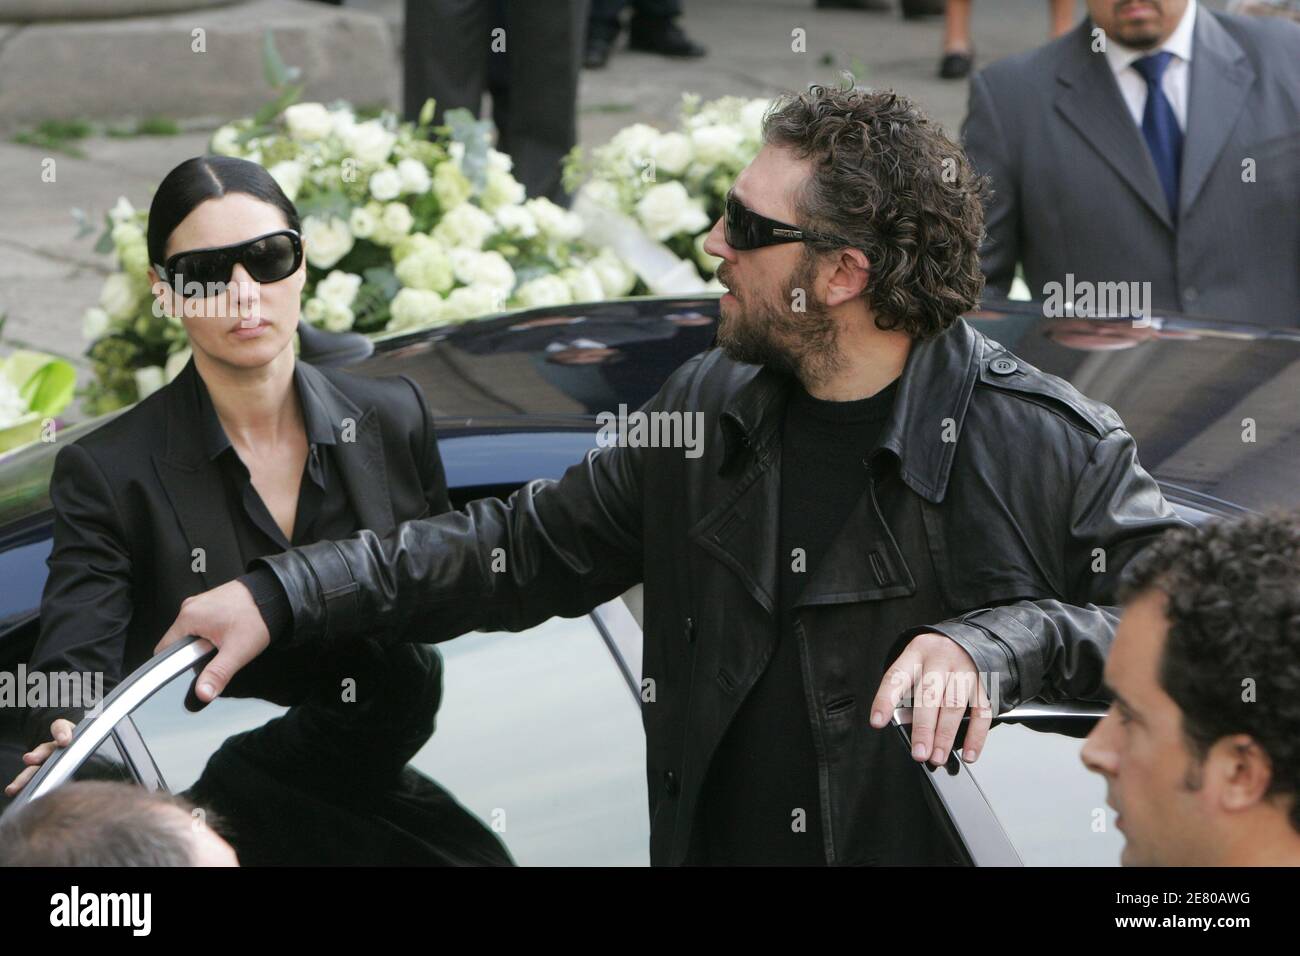 Monica Bellucci during Jean-Pierre Cassel Funeral at St Eustache News  Photo - Getty Images